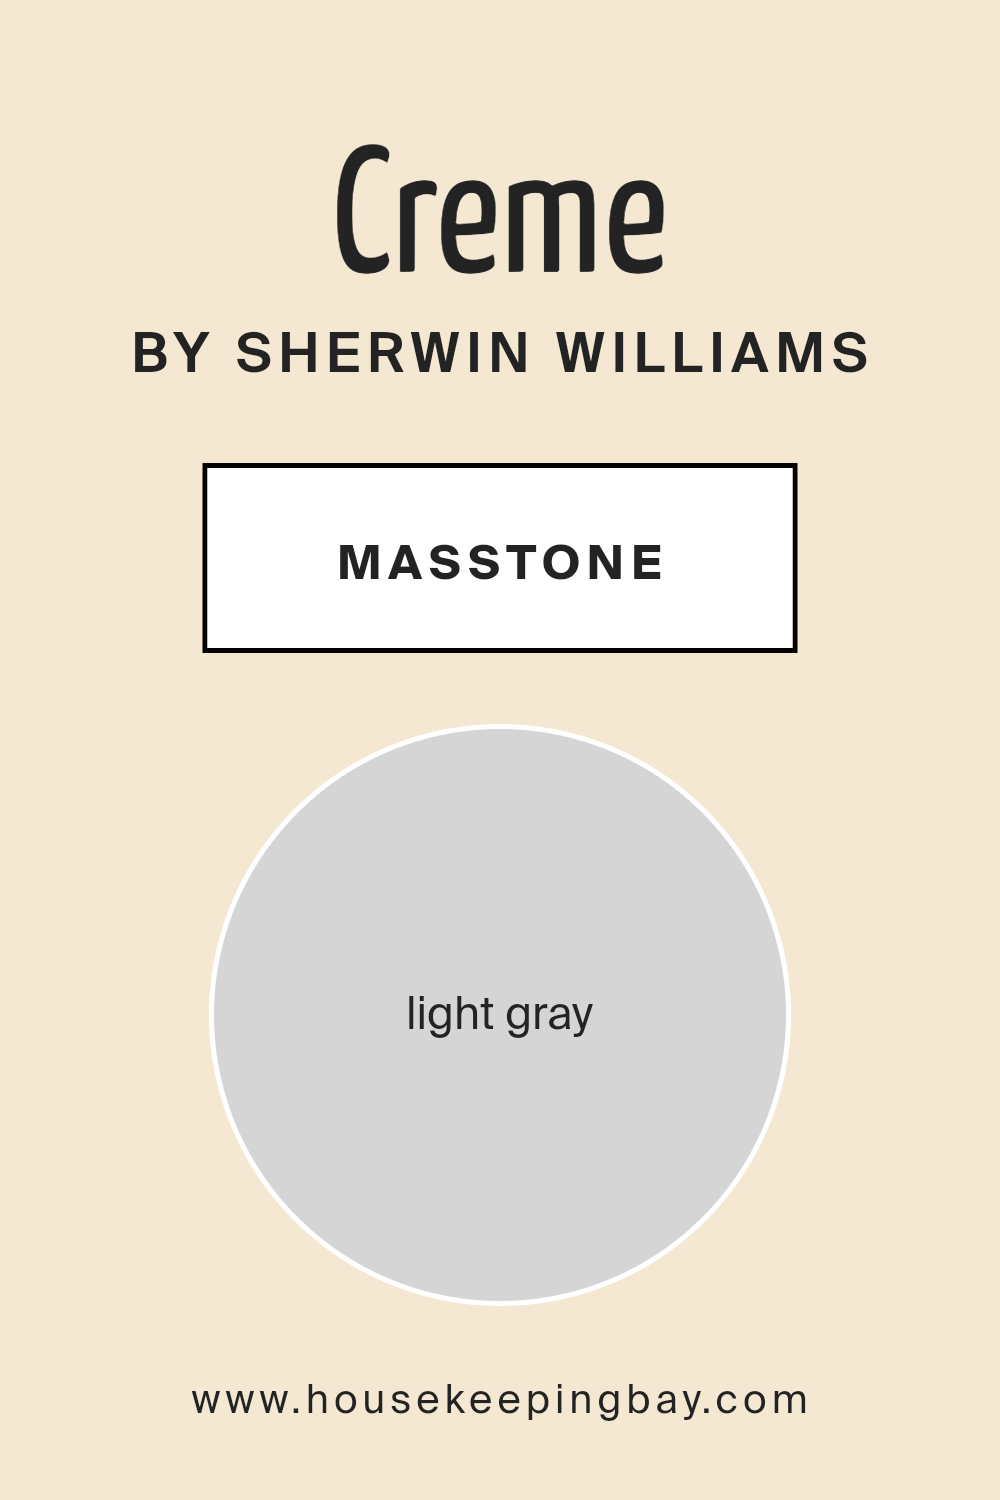 what_is_the_masstone_of_creme_sw_7556